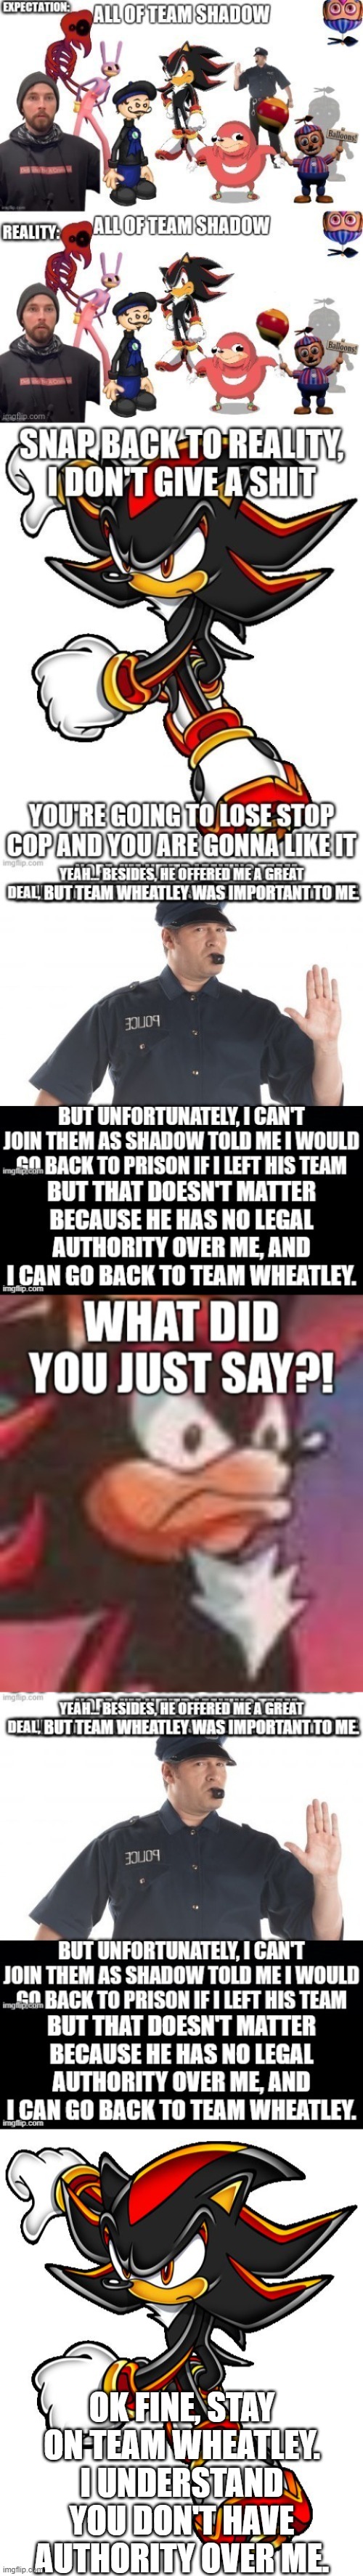 Stop beating a dead horse | OK FINE, STAY ON TEAM WHEATLEY. I UNDERSTAND YOU DON'T HAVE AUTHORITY OVER ME. | image tagged in shadow the hedgehog | made w/ Imgflip meme maker